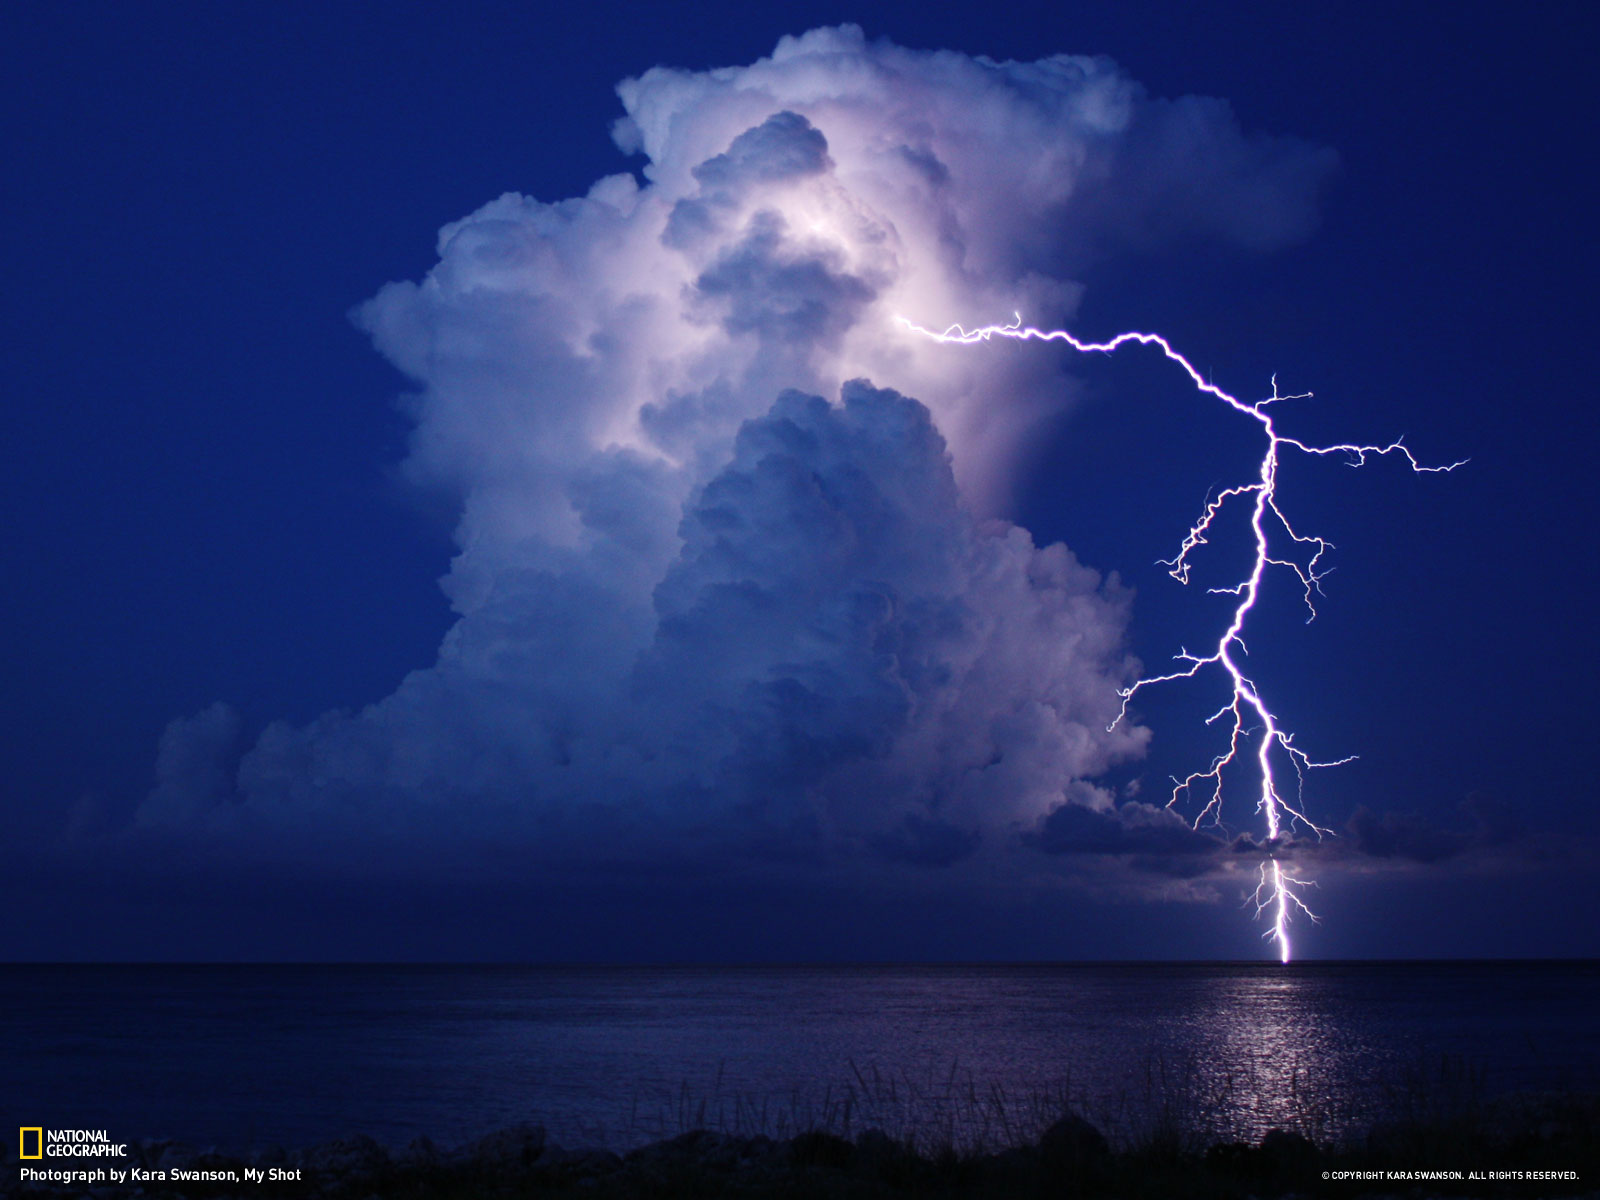 An action shot of lightning stricking the ocean while illuminating a cloud